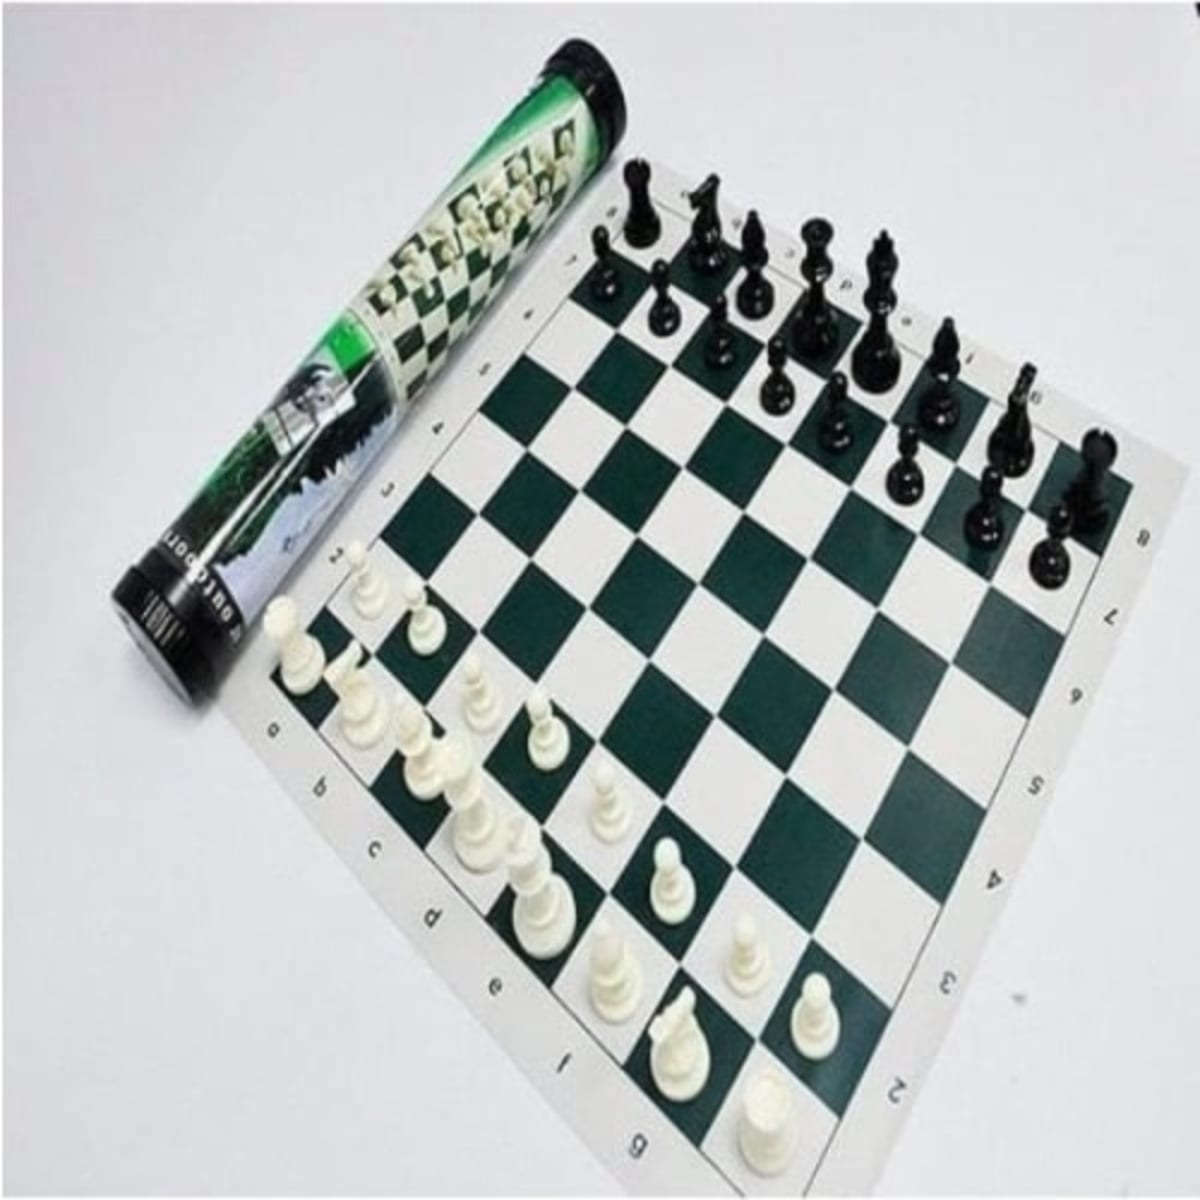 CAPS Conversions - Chess Forums 